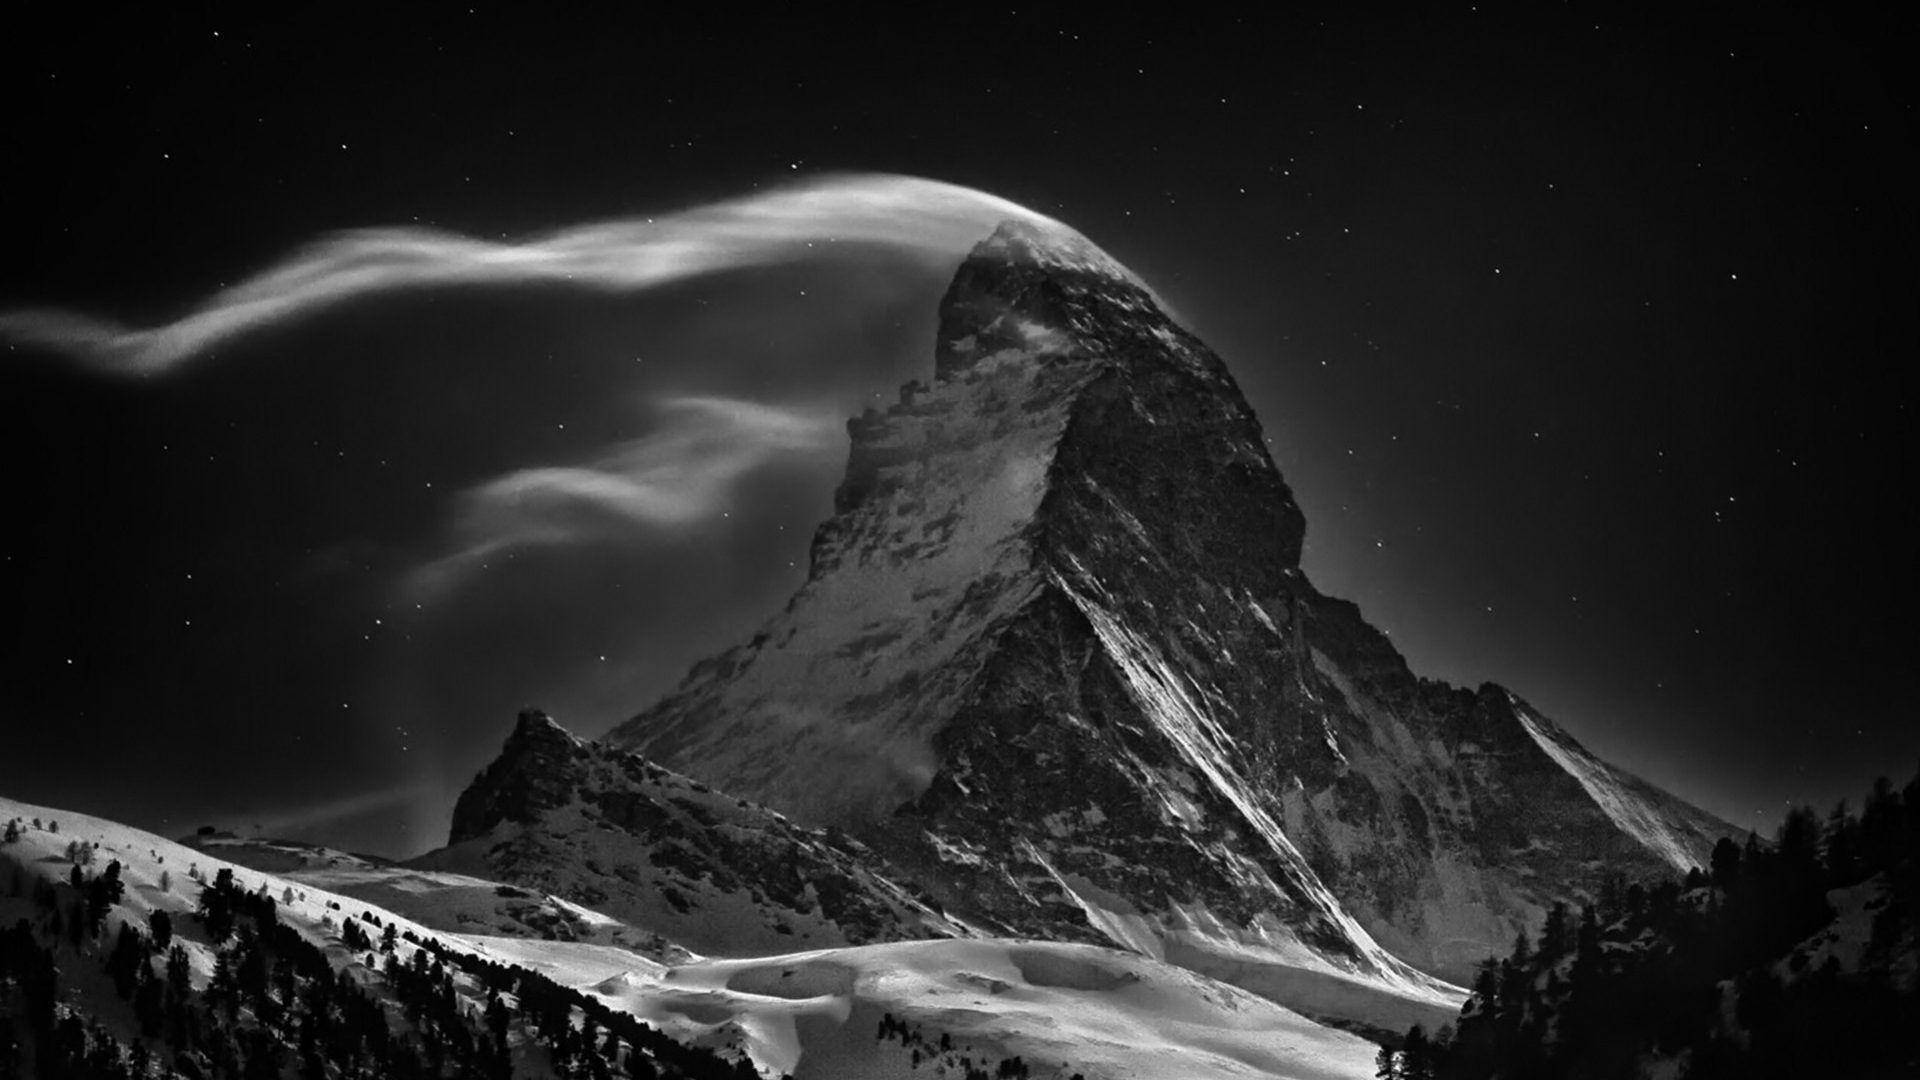 A Windy Snowy Mountain During Winter